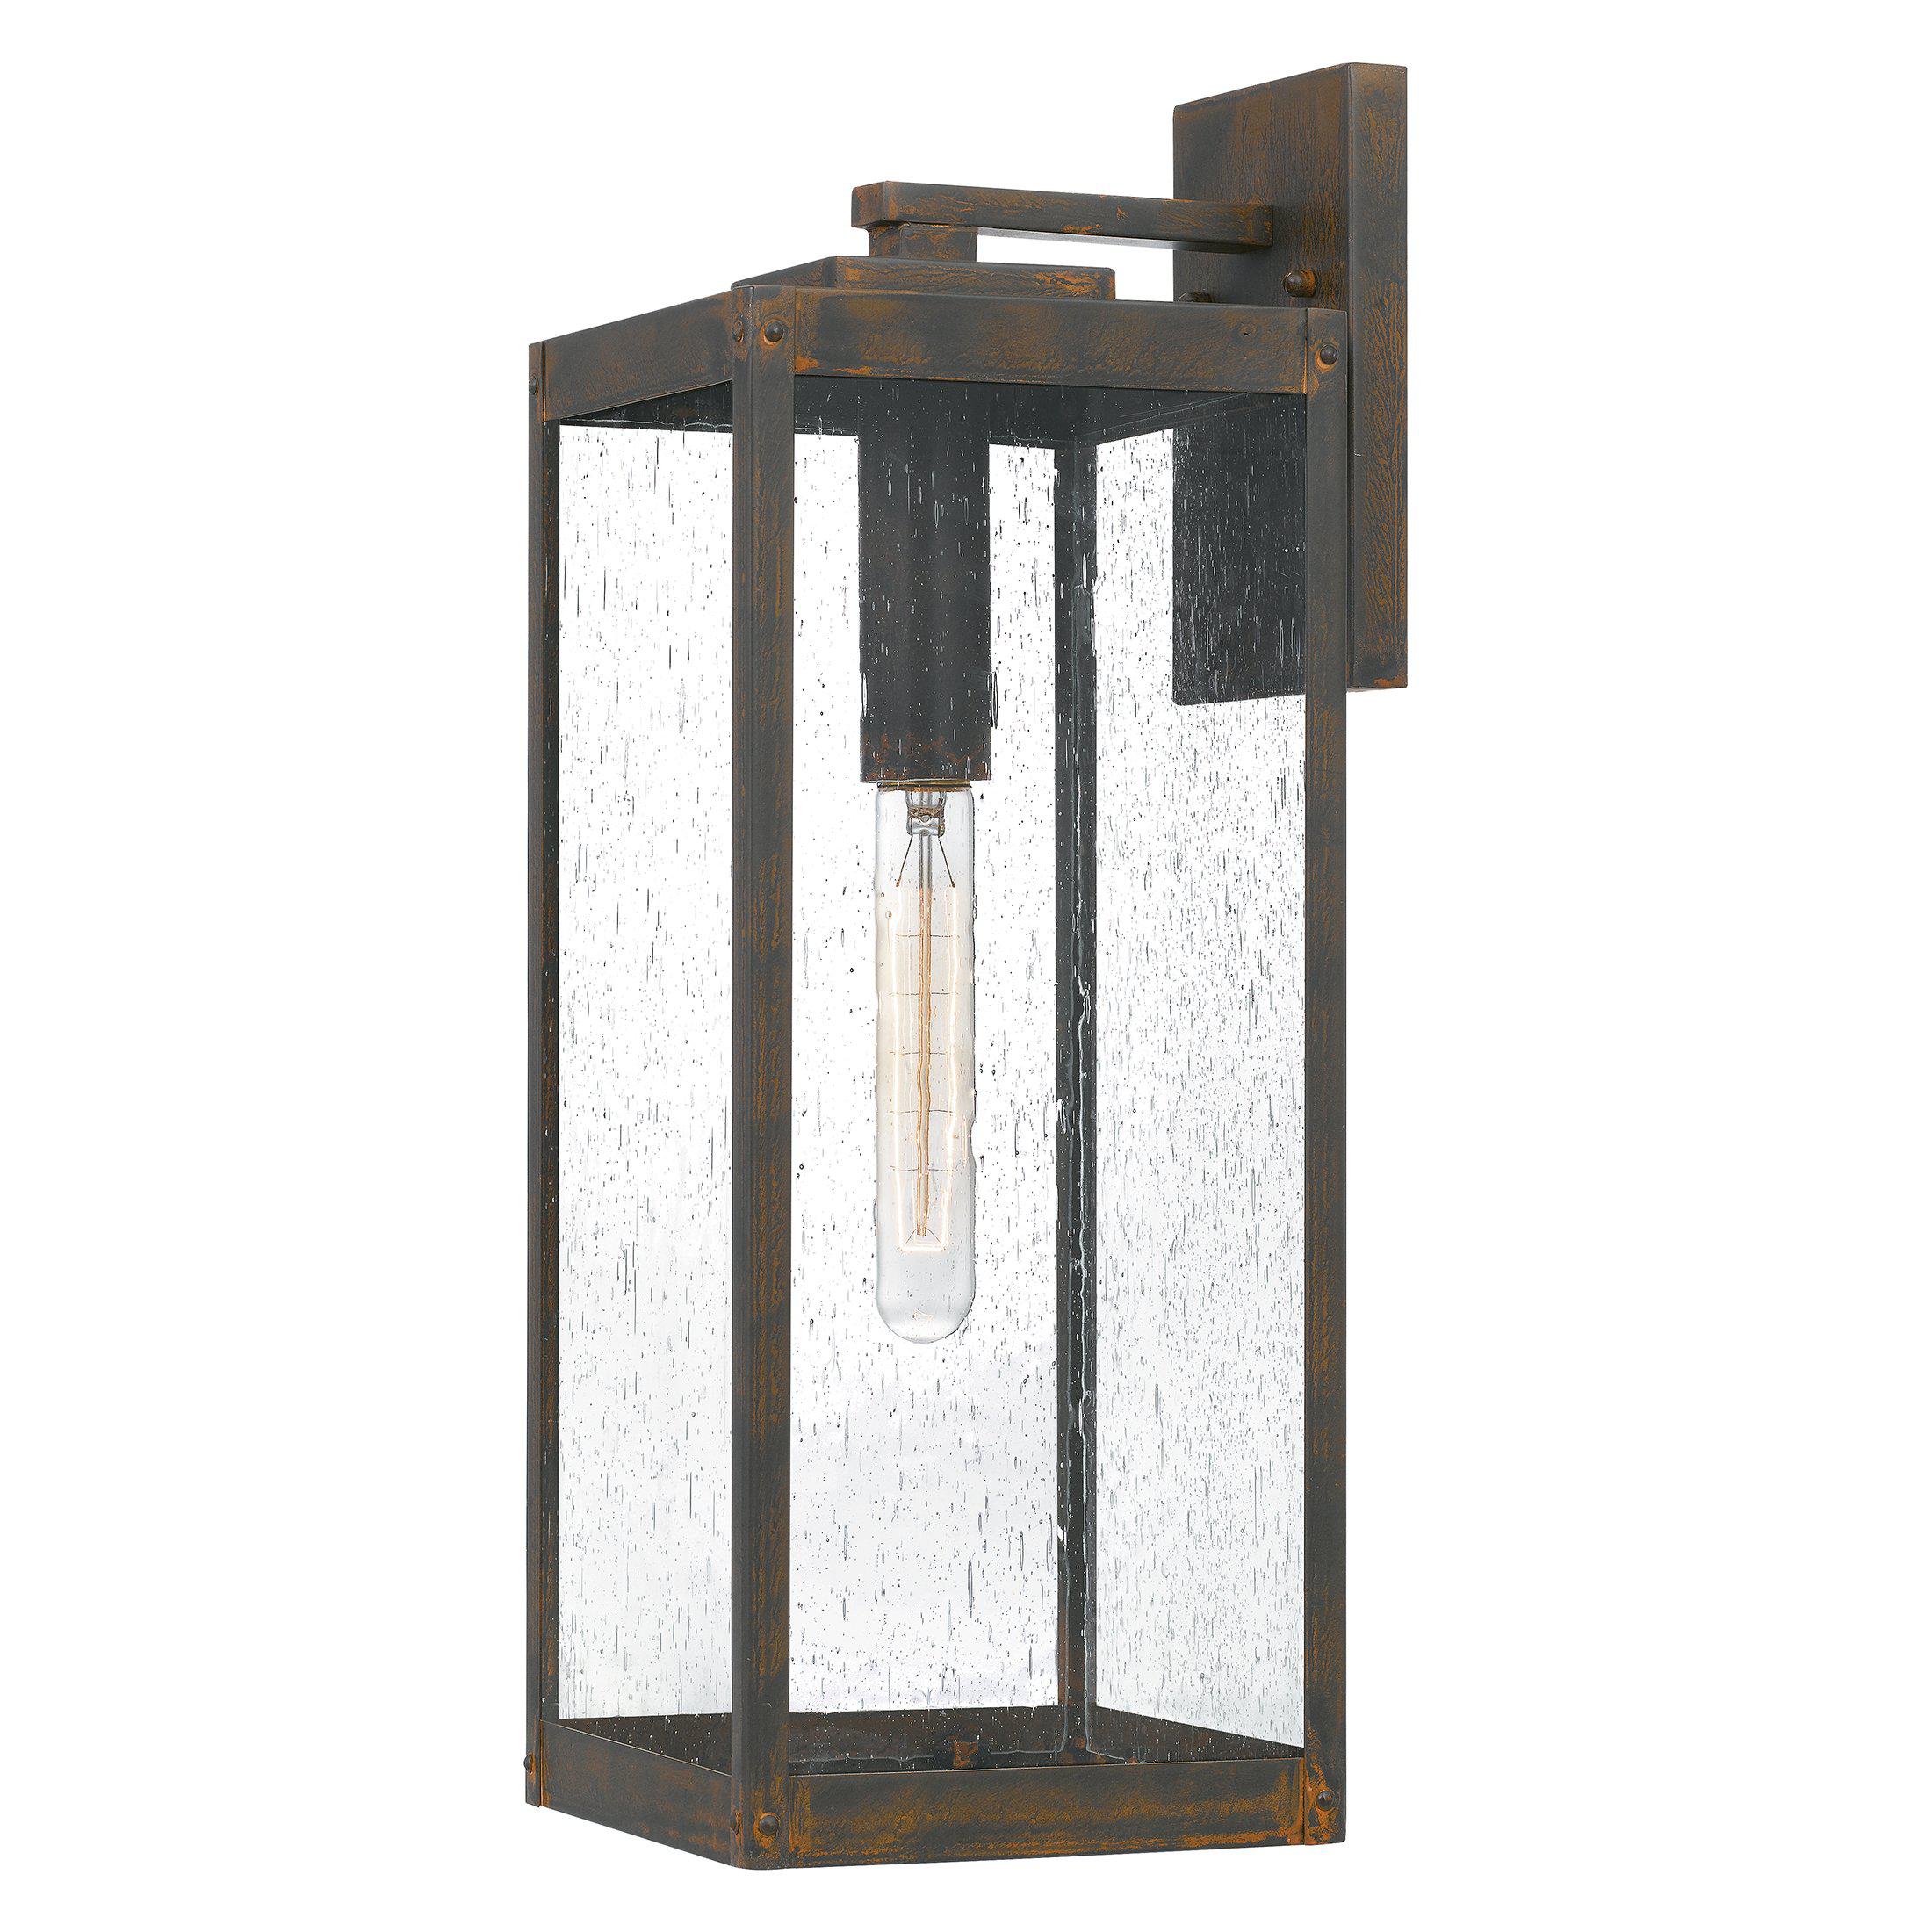 Quoizel  Westover Outdoor Lantern, Large Outdoor l Wall Quoizel Industrial Bronze  